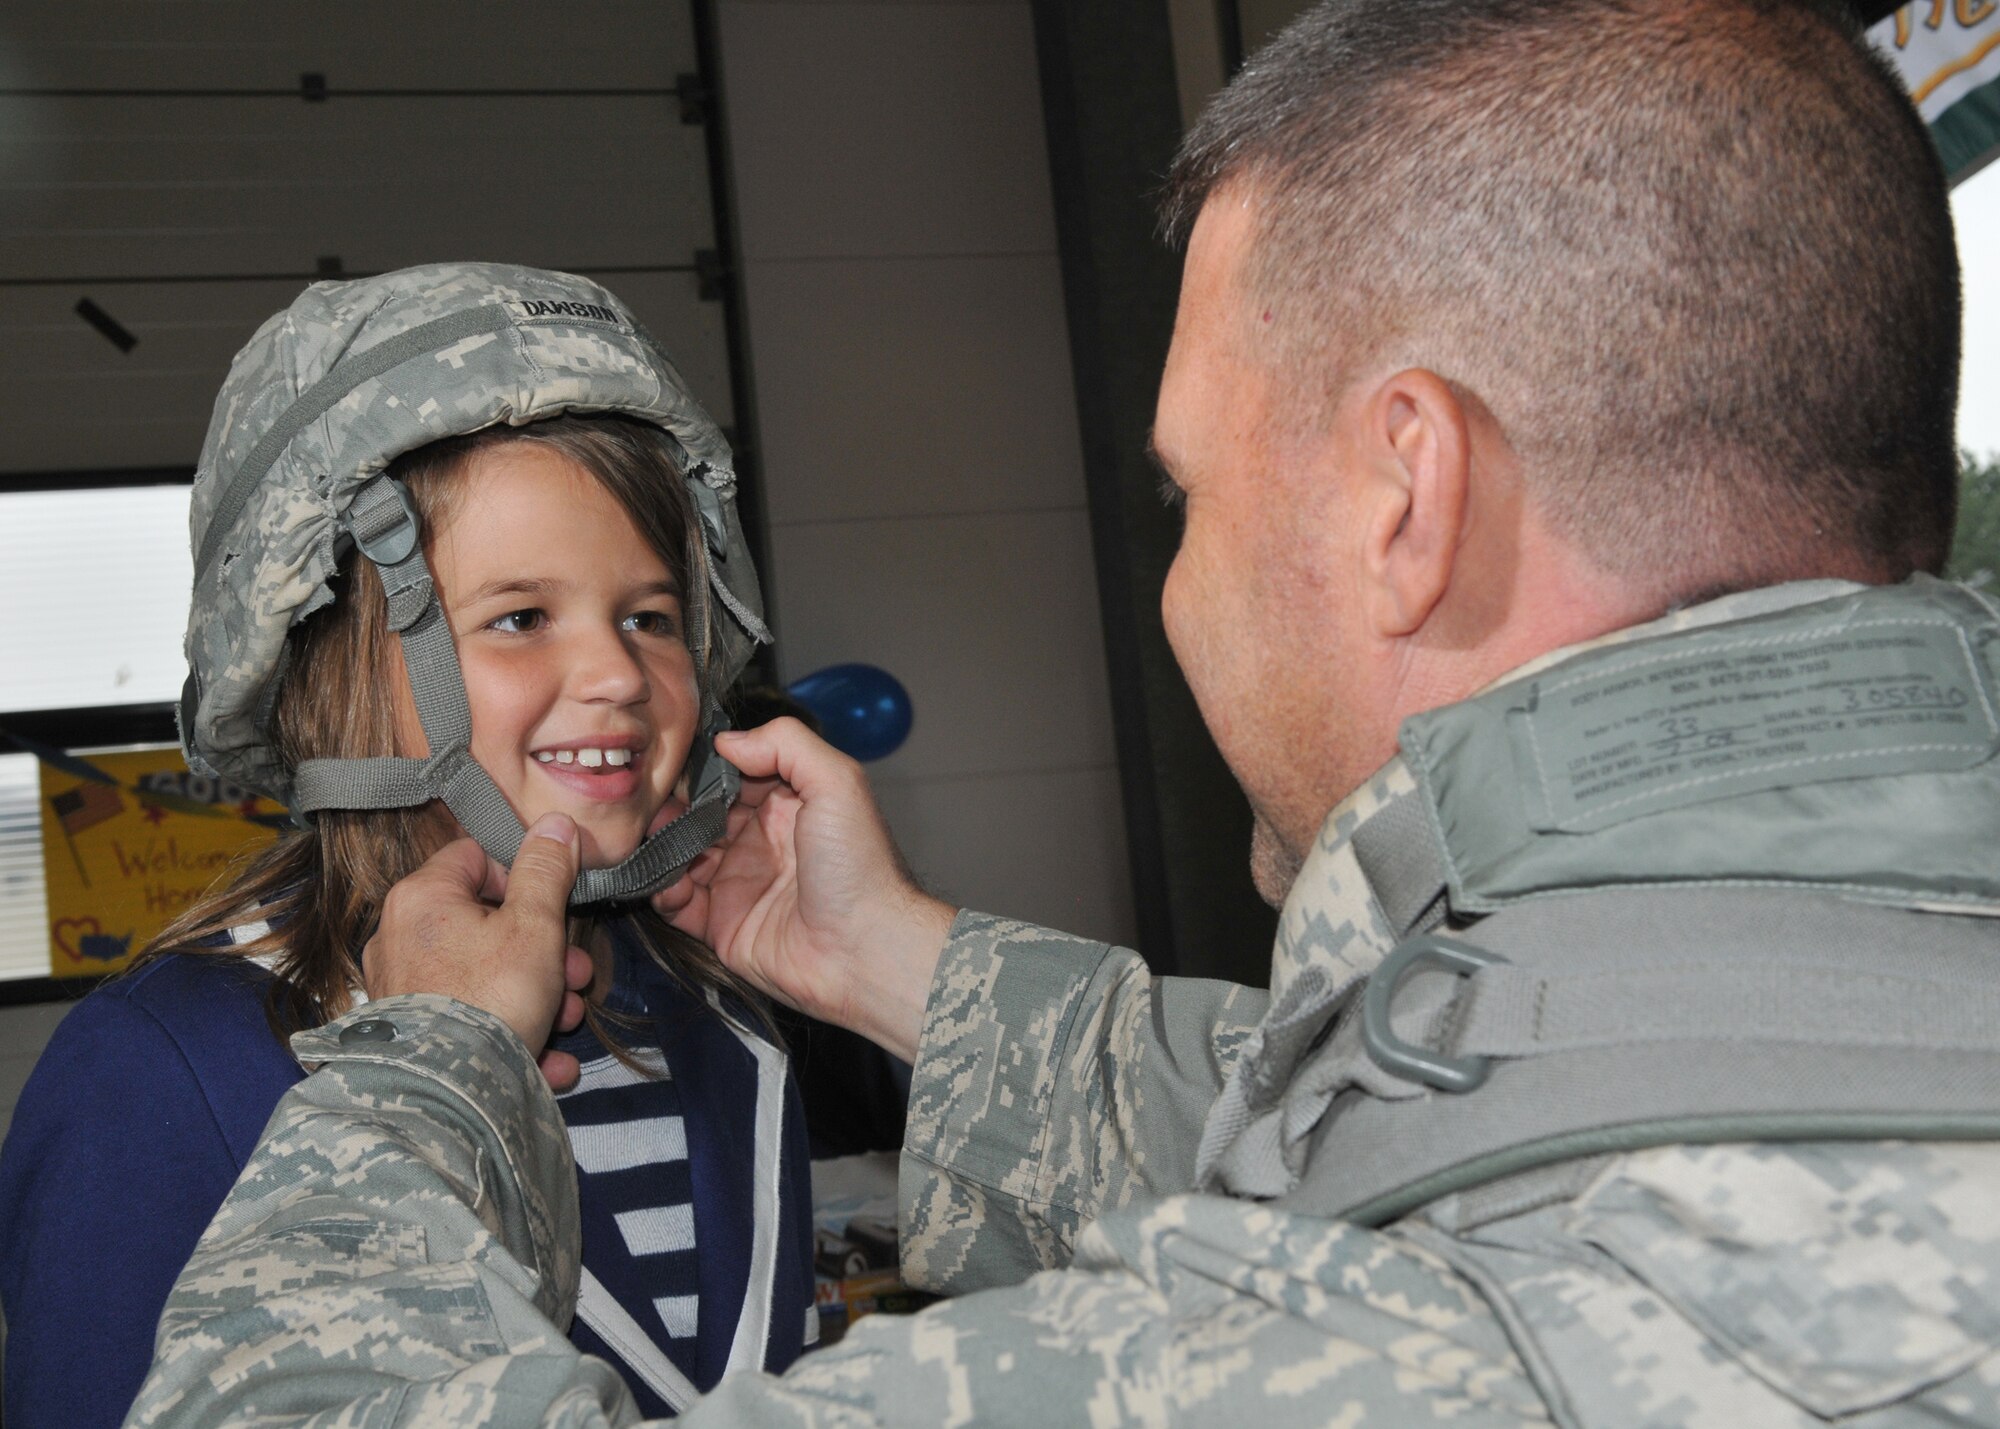 SPANGDAHLEM AIR BASE, Germany – Lt. Col. Gary Dawson, 606th Air Control Squadron director of operations, puts his helmet on his daughter Katie after returning from a four-month deployment to Kandahar, Afghanistan, Sept. 16.  About 60 members of the 606th ACS operated radar and communication for command and control for the 71st Expeditionary Air Control Squadron.  The unit also deployed 300 short tons of equipment to support air battle management operations and more than 13,000 sorties.  Approximately 30 other 606th ACS members also returned from a four-month deployment to southwest Asia in support of the 73rd EACS.  (U.S. Air Force photo/Airman 1st Class Nick Wilson)